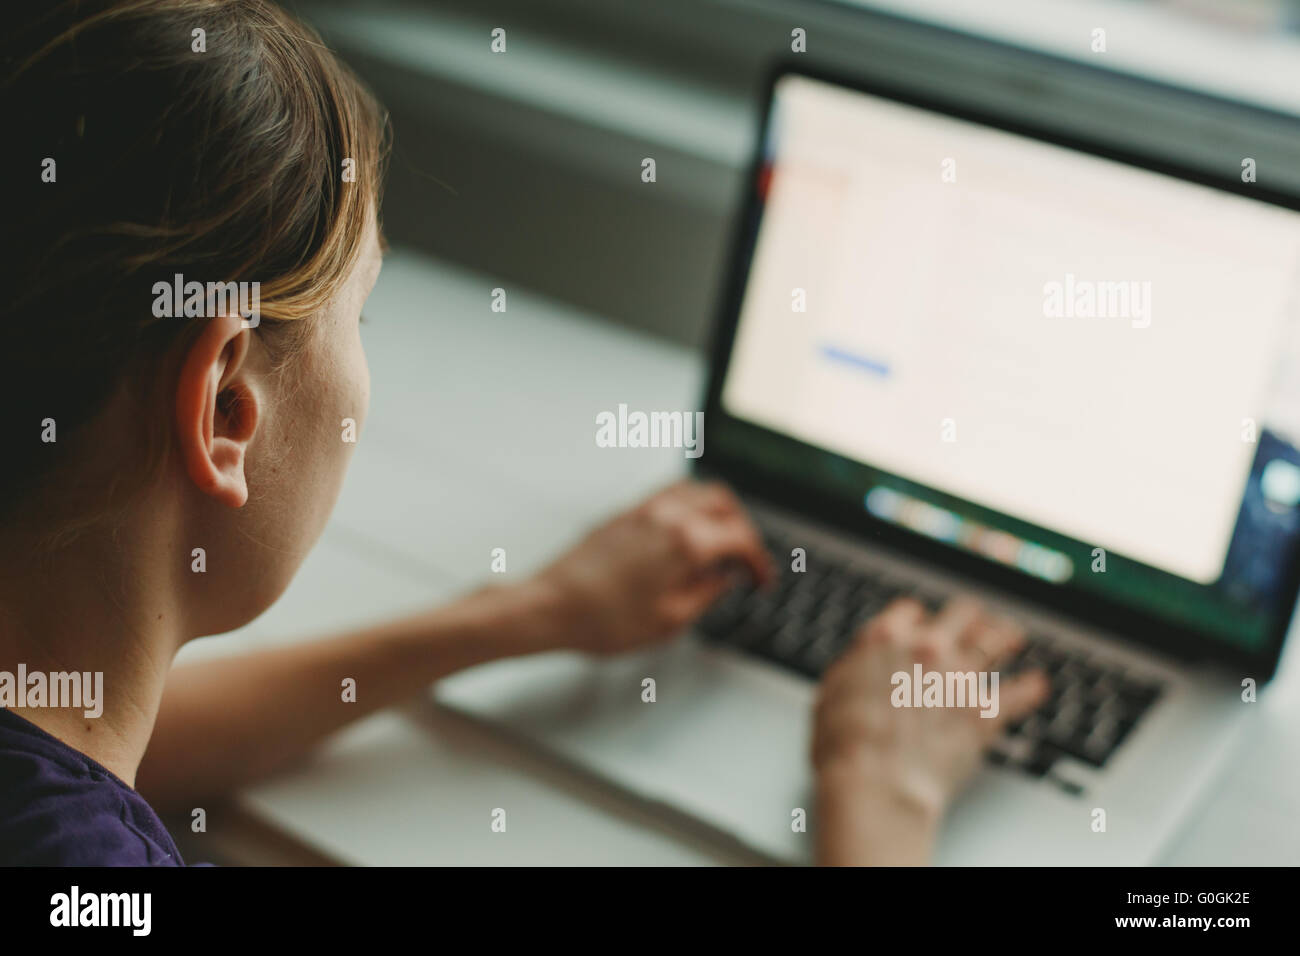 Woman working with laptop placed on wooden desk Stock Photo